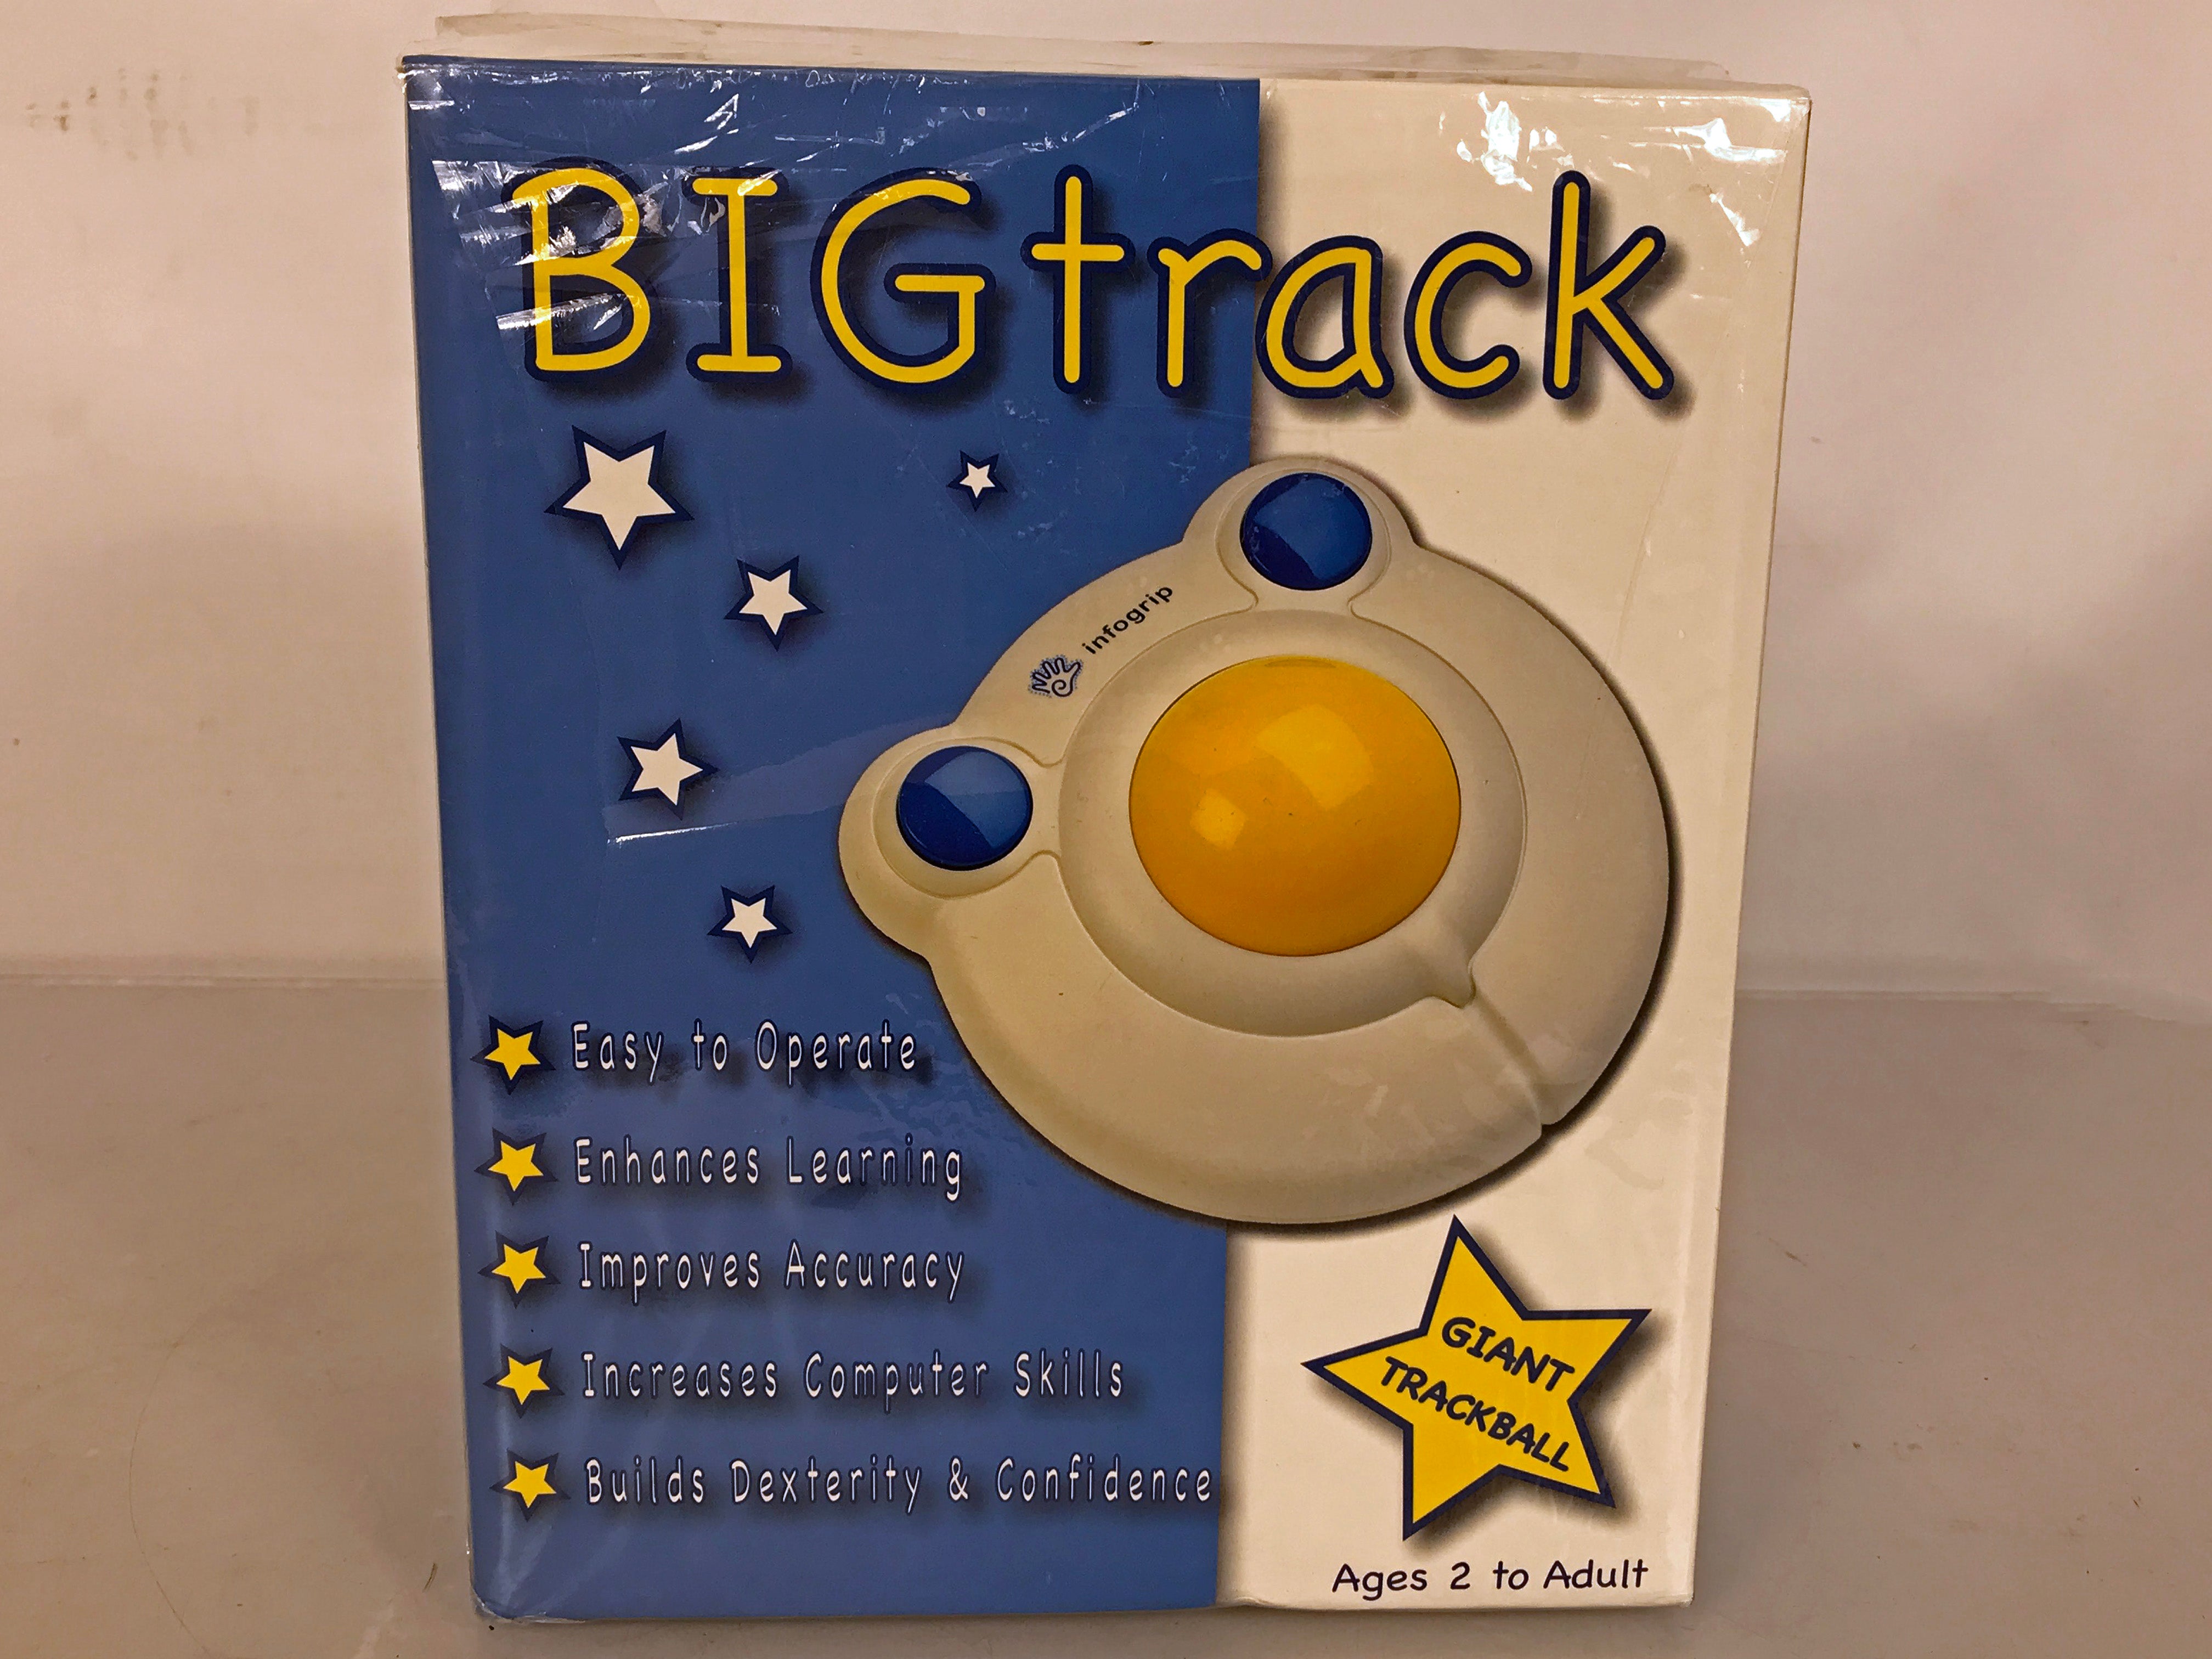 Infogrip BIGtrack 3" Switch Adapted Trackball Controller